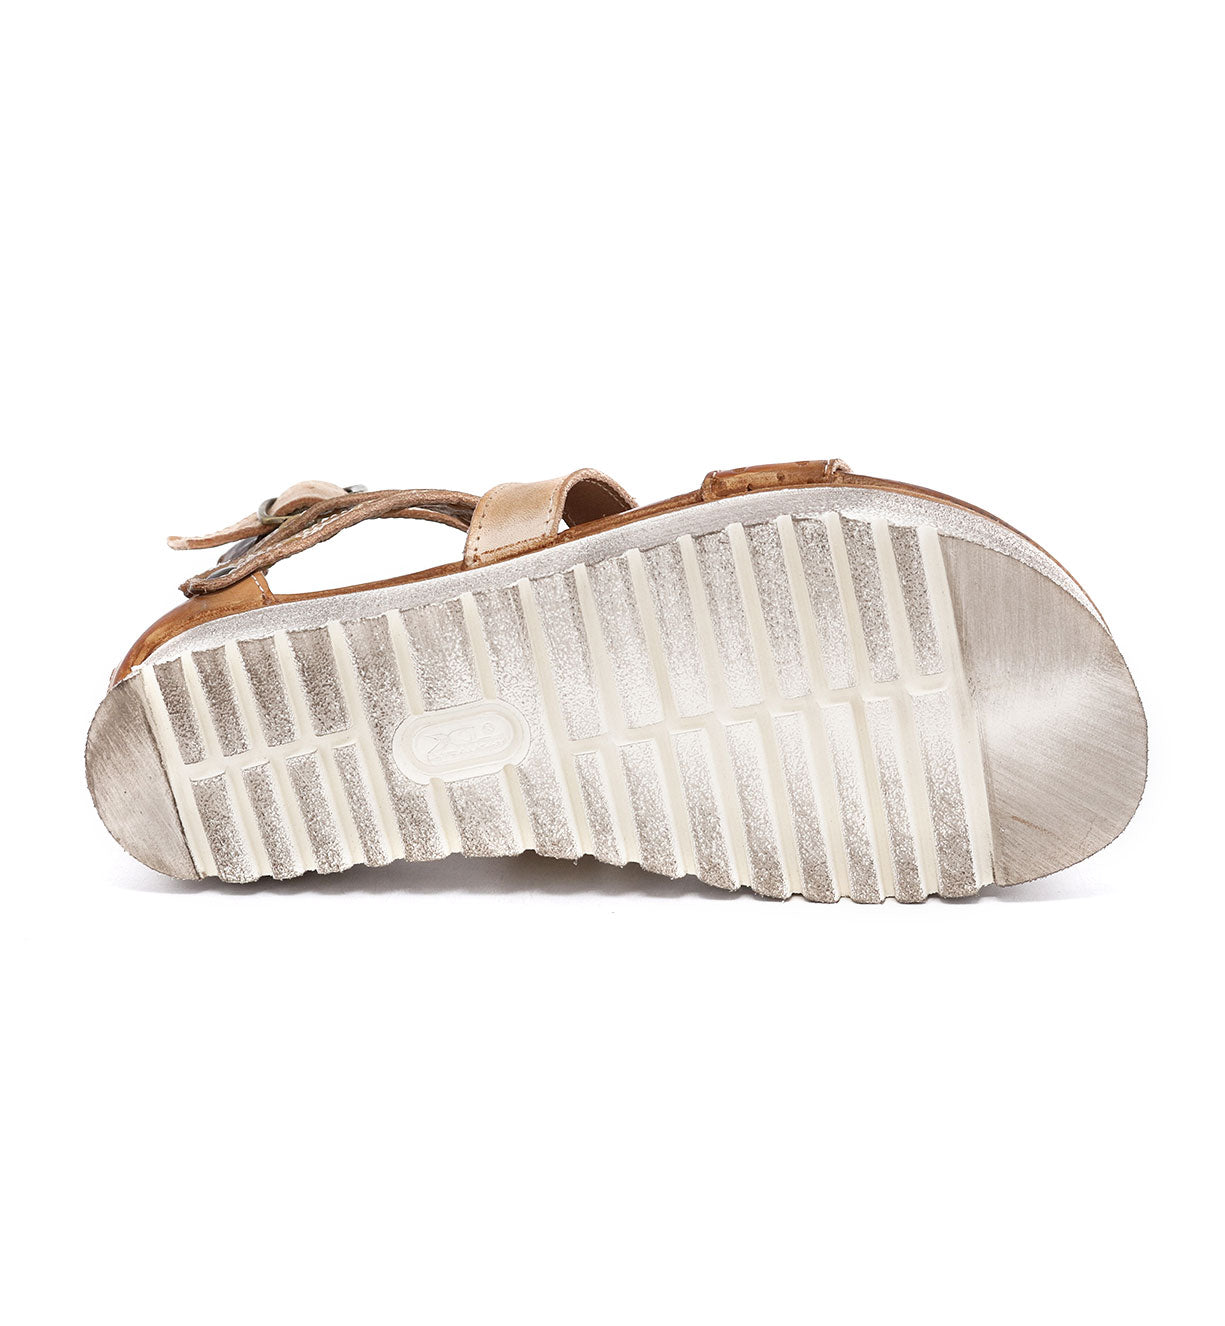 A pair of Artemia sandals by Bed Stu on a white background.